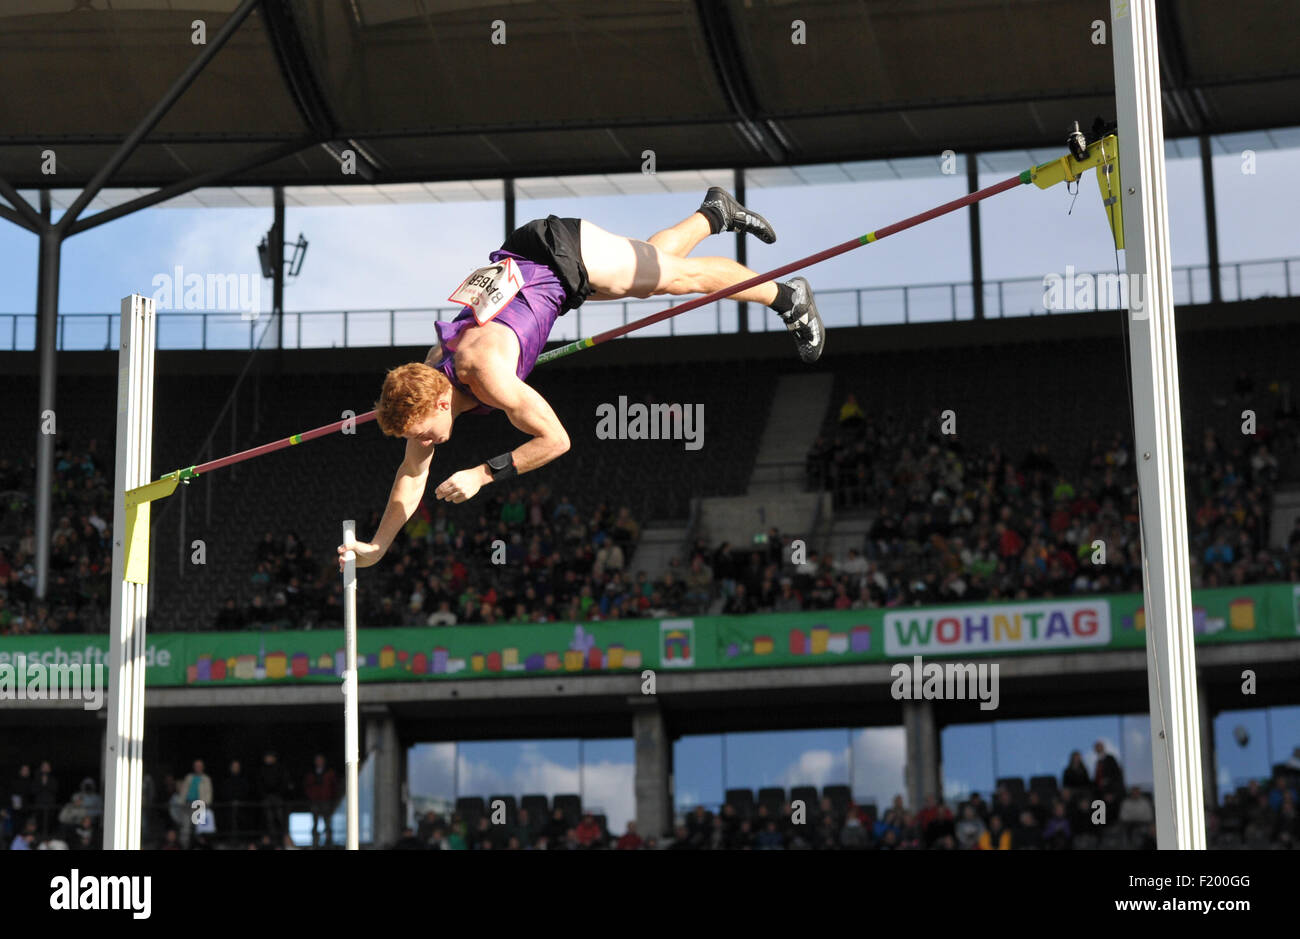 Shawnacy Barber of Canada in action in the men's pole vault competition during the ISTAF athletics World Challenge in Berlin, Germany, 06 September 2015.  Shawnacy Barber took thrid place. Photo: Roland Popp/dpa - NO WIRE SERVICE - Stock Photo